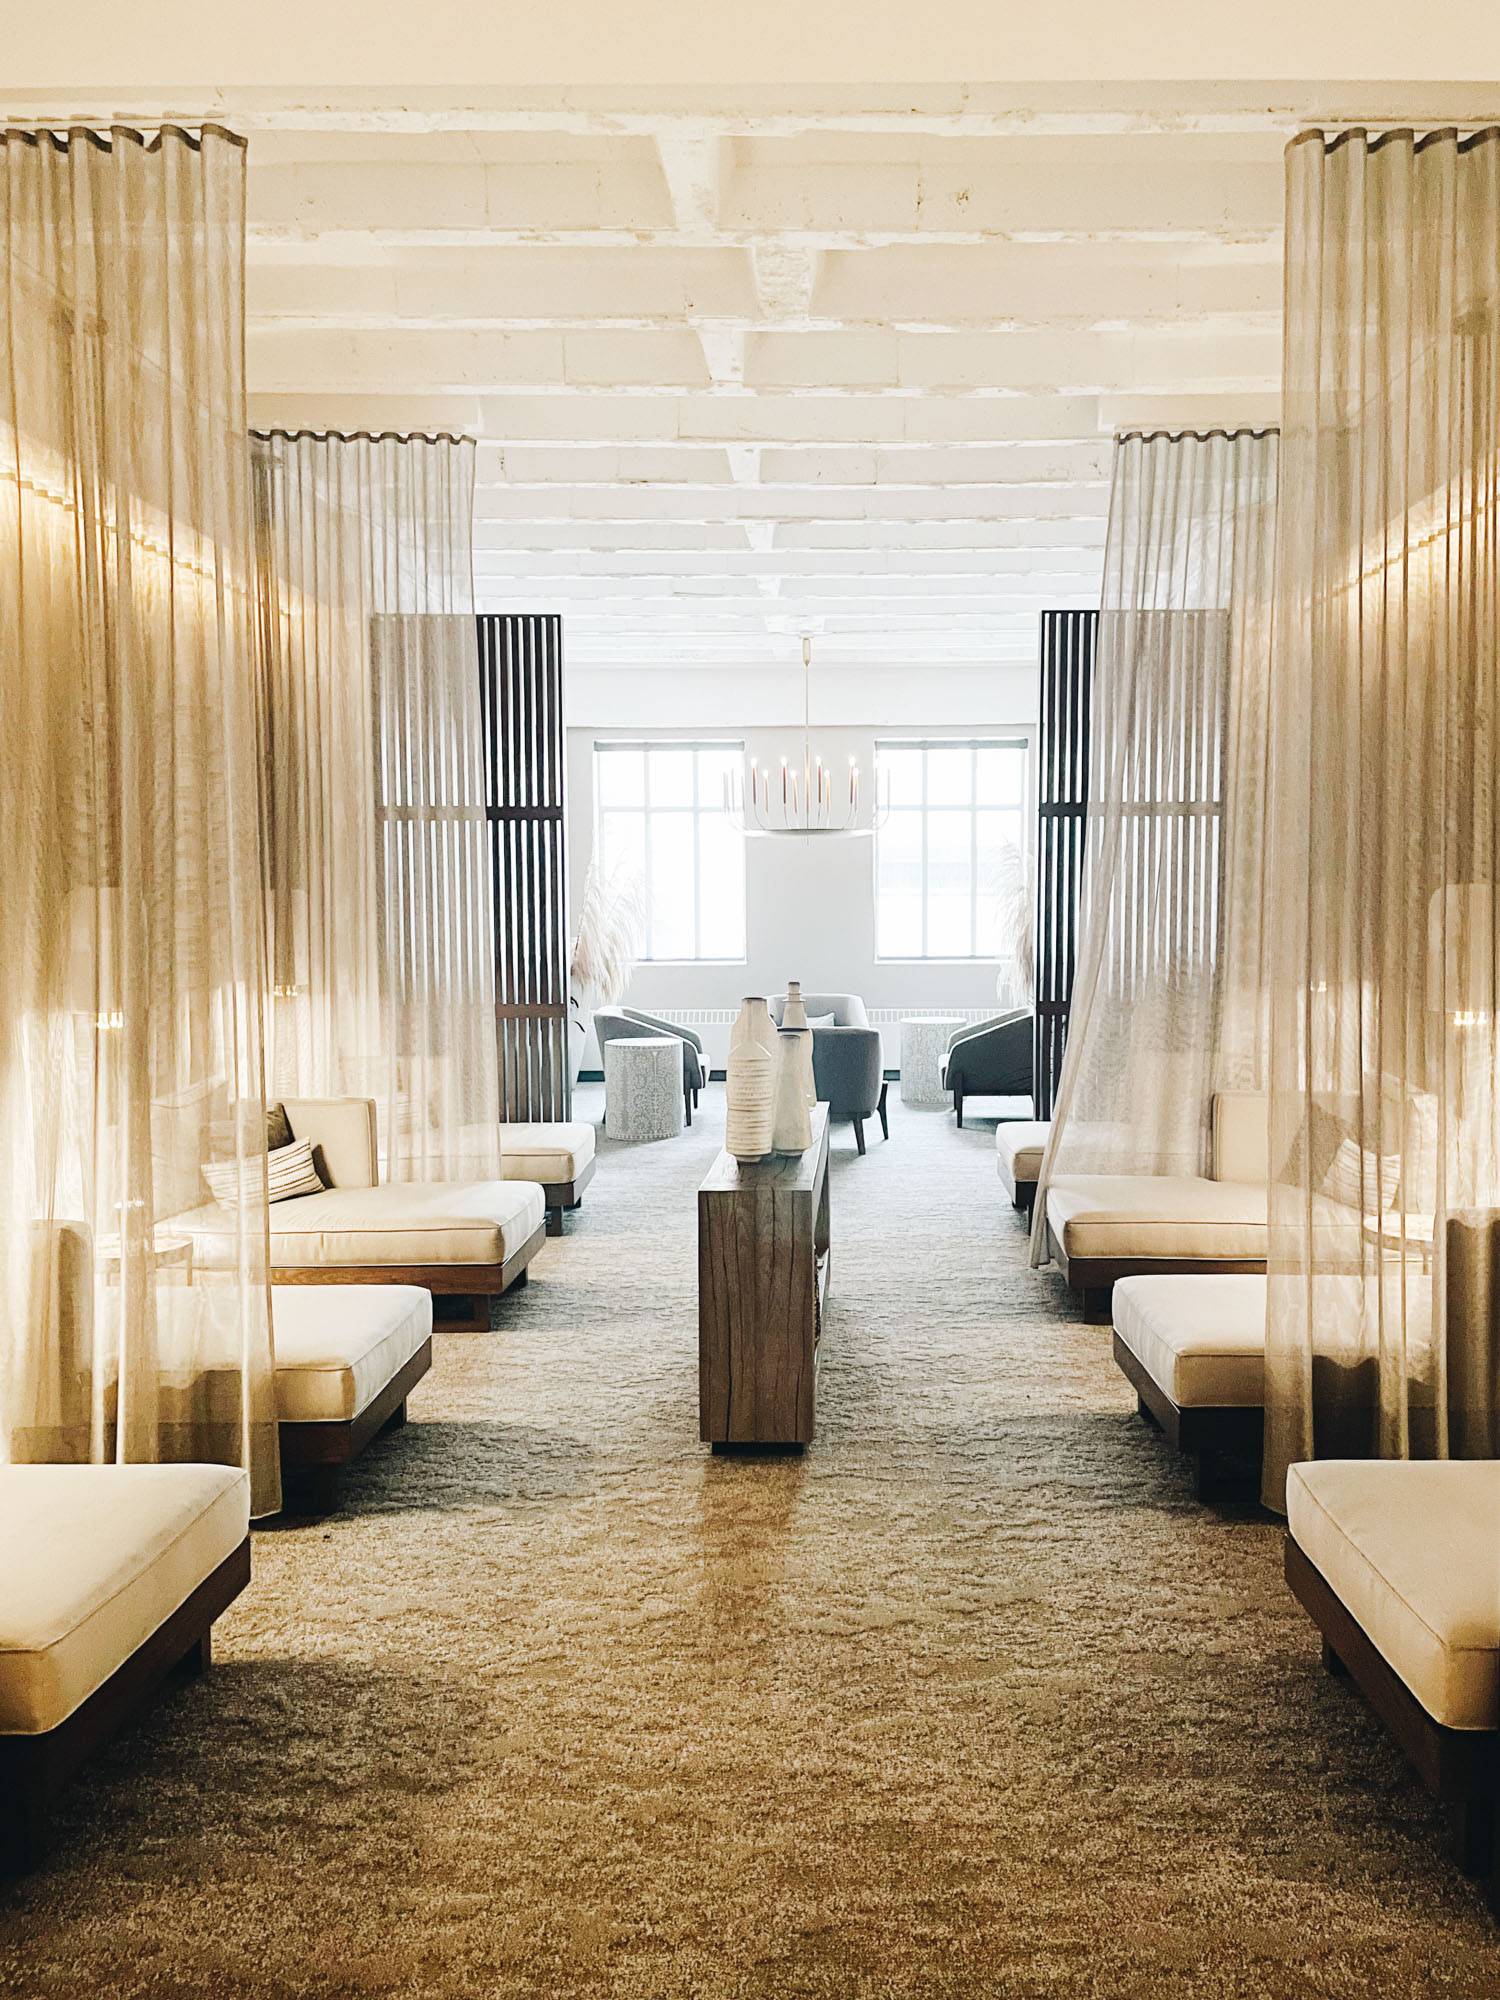 Image of the Anda Spa in downtown Minneapolis with rows of private lounge chairs.